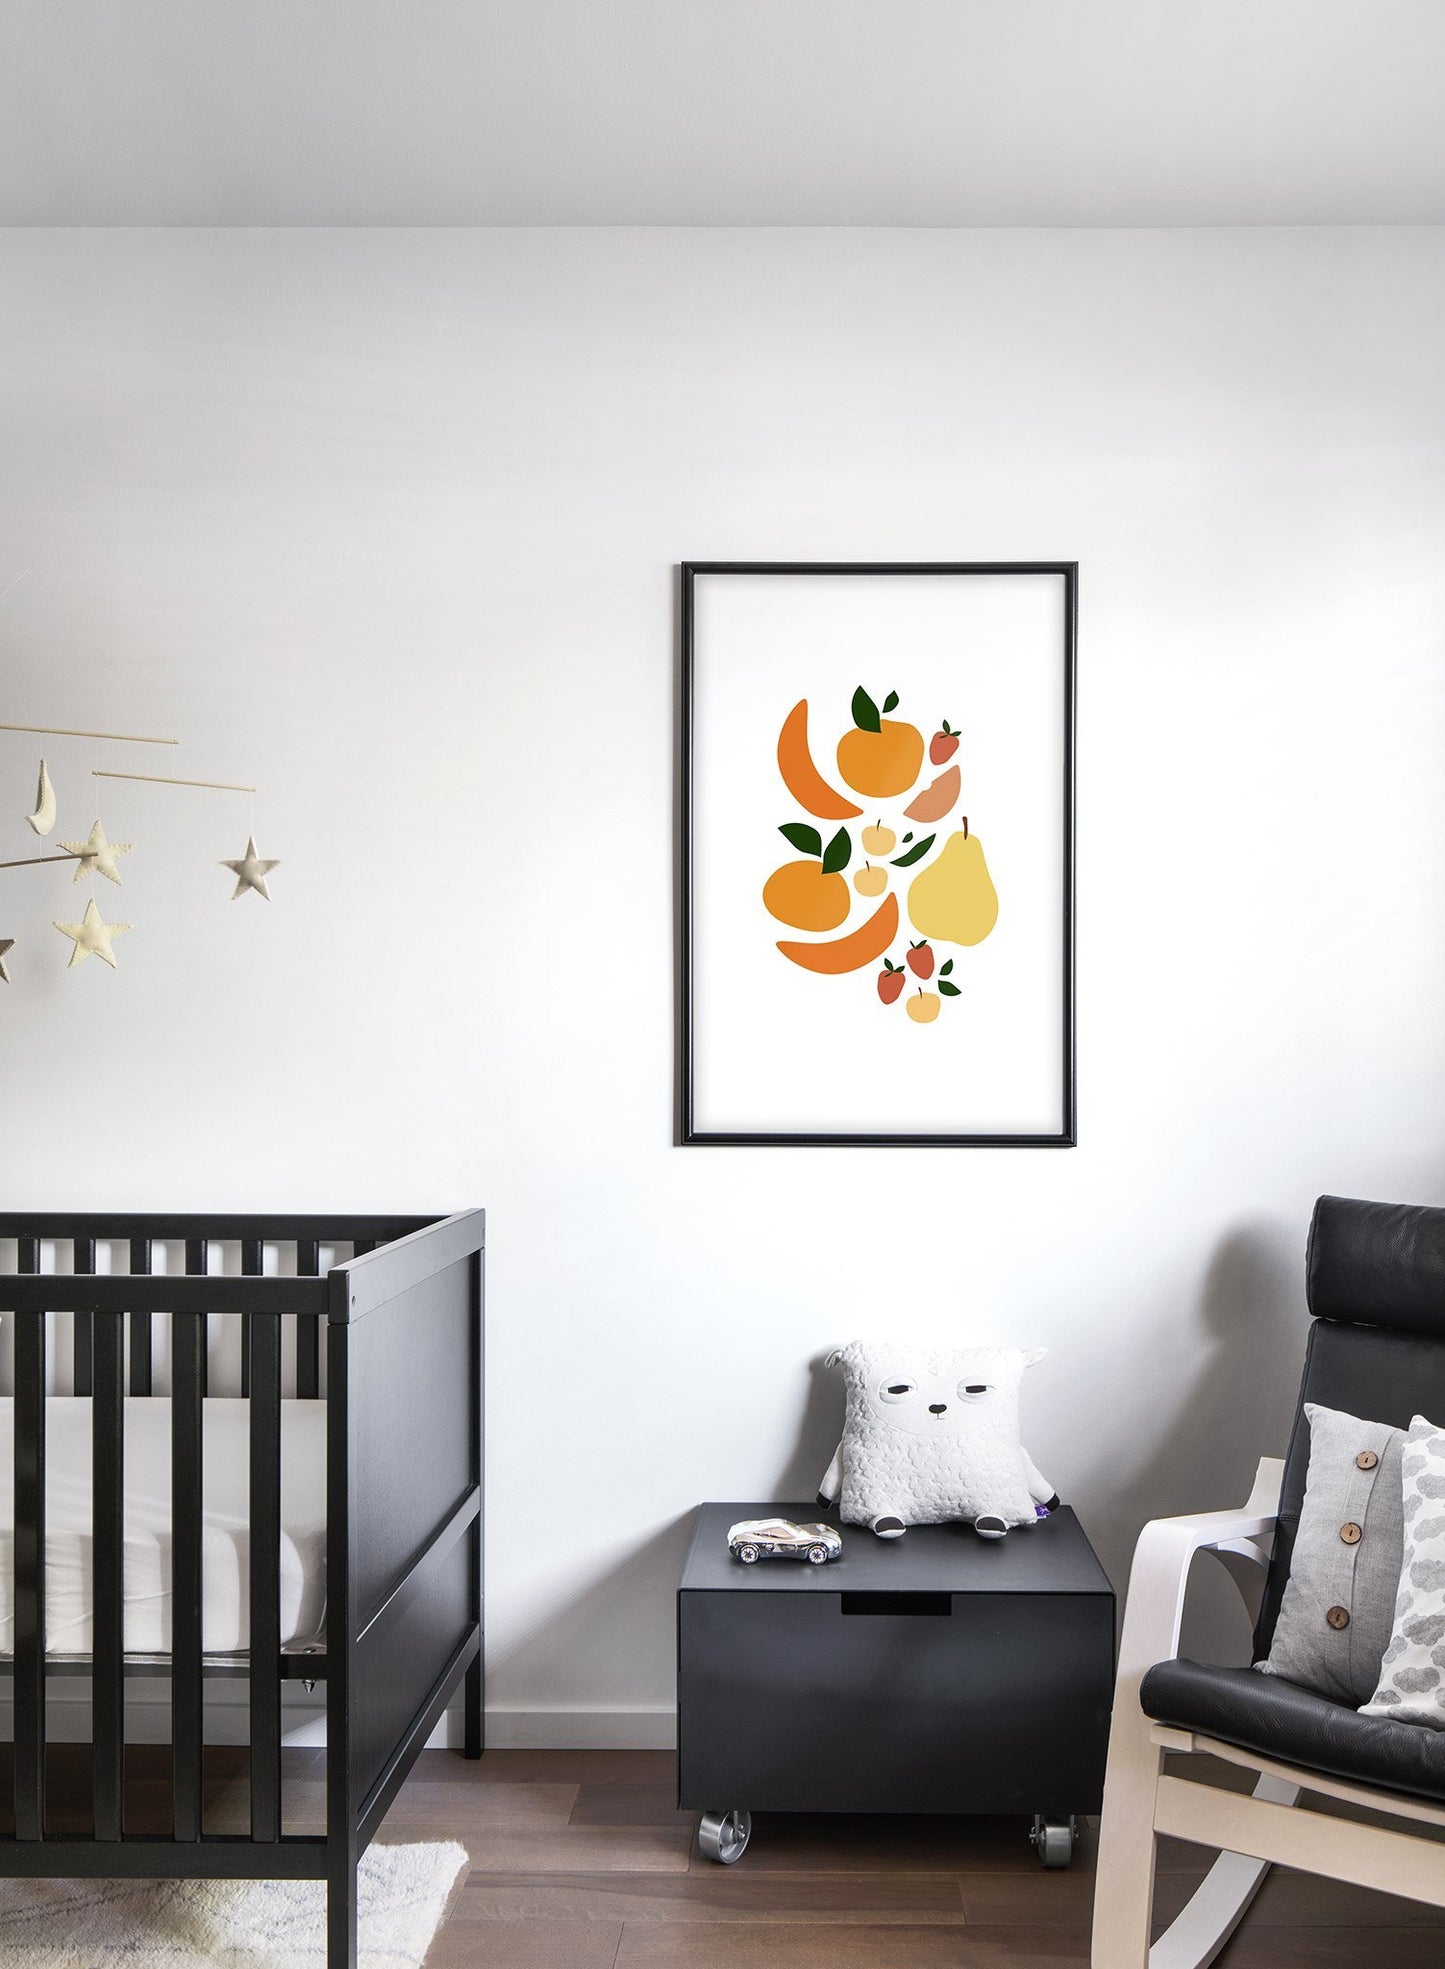 Modern minimalist poster by Opposite Wall with colourful illustration of Fruit Salad - kids bedroom lifestyle